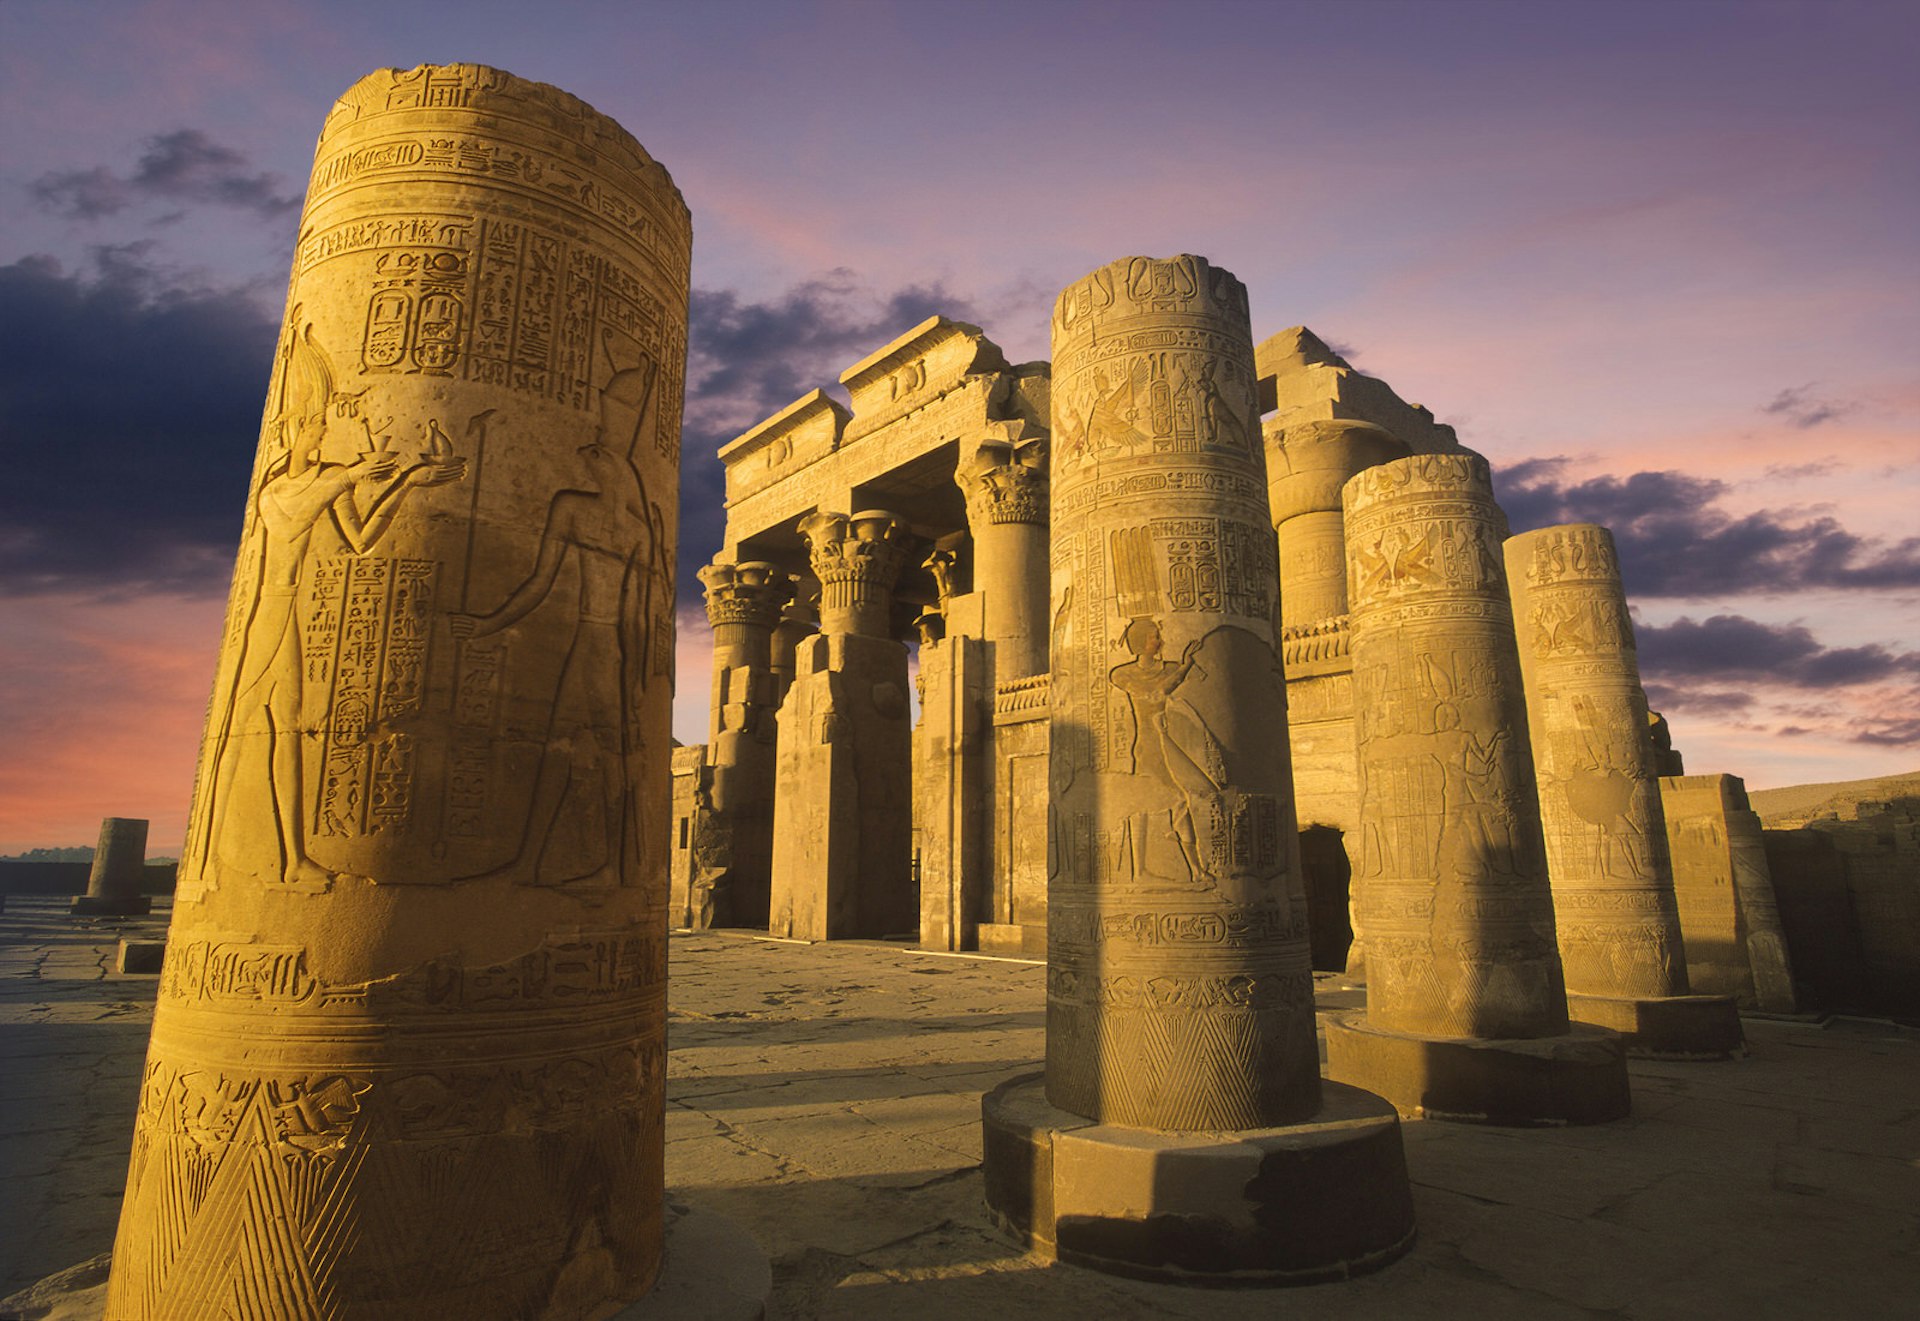 Kom Ombo temple at sunset on the Nile in Egypt. Image by Christian Delbert / Shutterstock